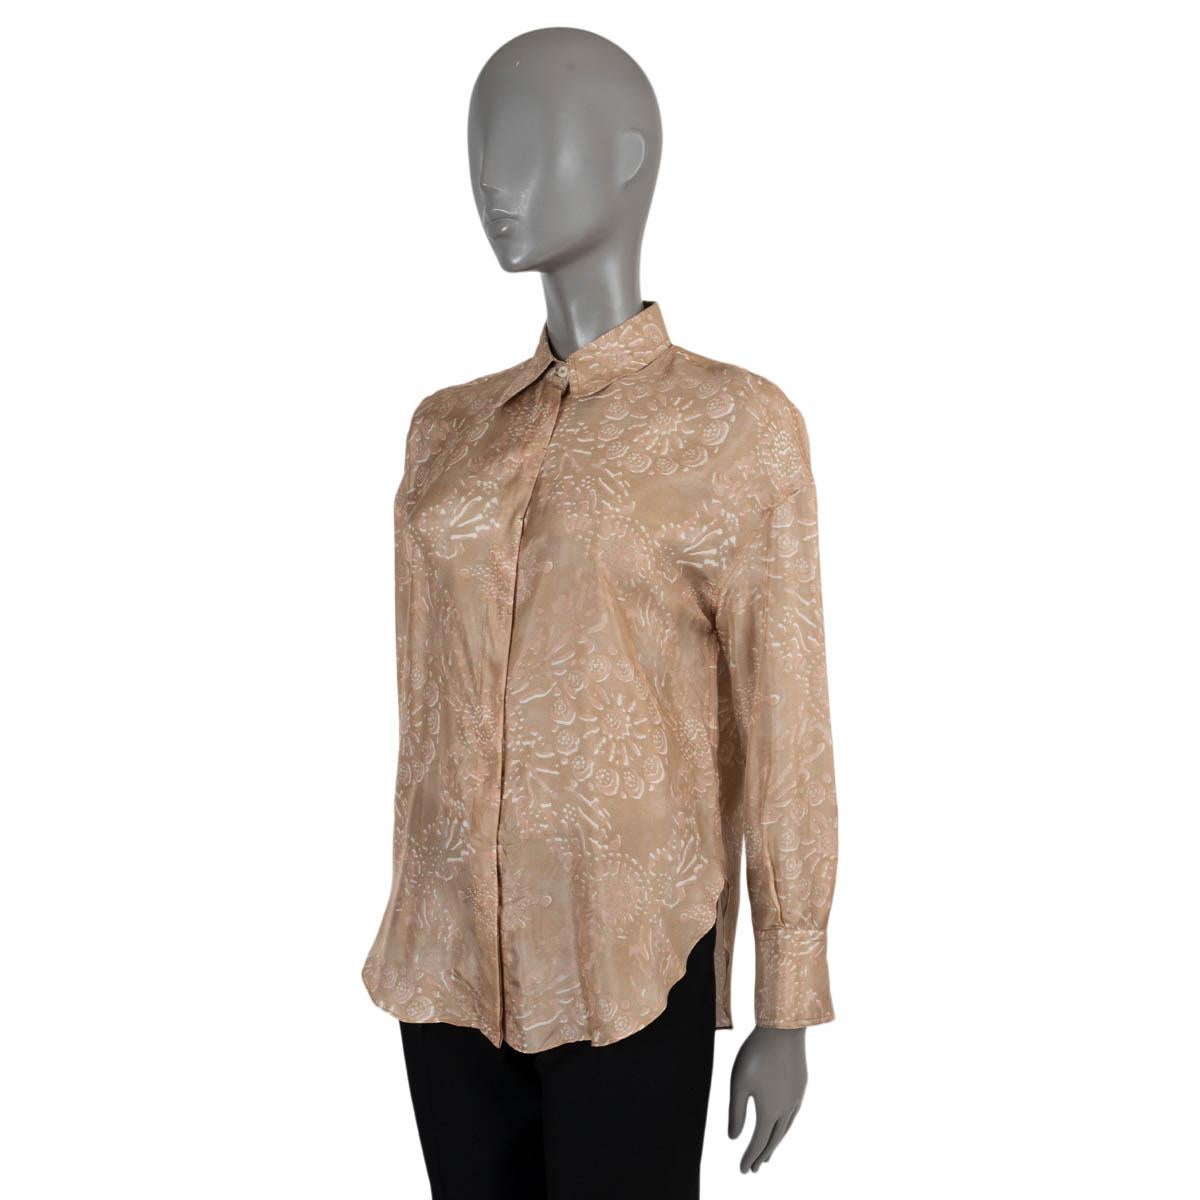 100% authentic Brunello Cucinelli floral silk (100%) shirt in pale pink, brown and ivory. Closes with concealed front button. Has been worn and is in excellent condition. 

Measurements
Tag Size	XS
Size	XS
Shoulder Width	50cm (19.5in)
Bust